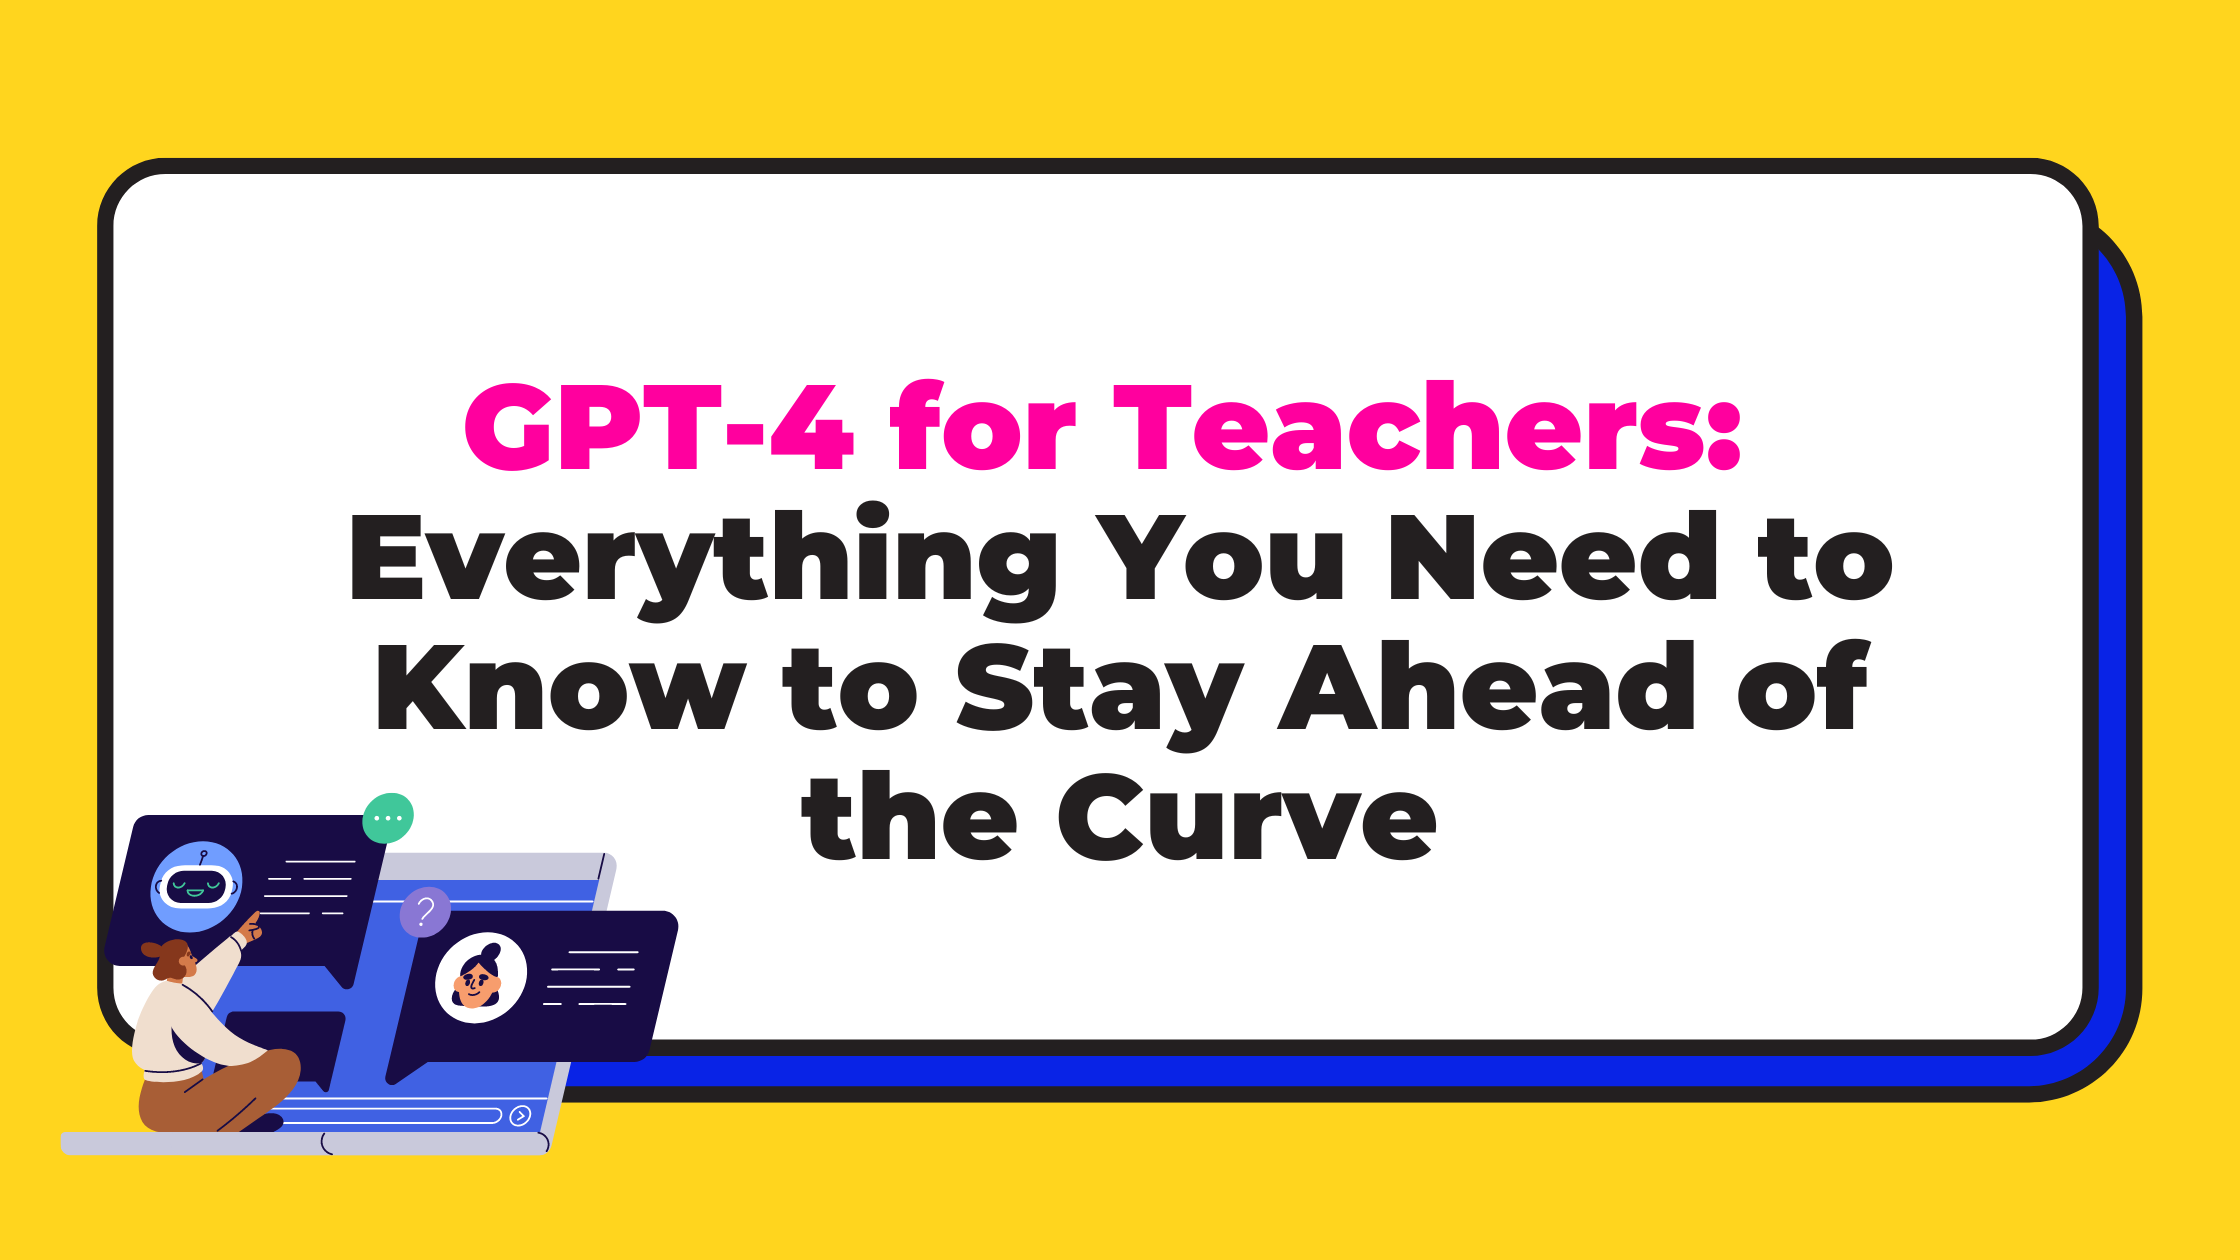 gpt-4-teachers-everything-need-know-stay-ahead-curve